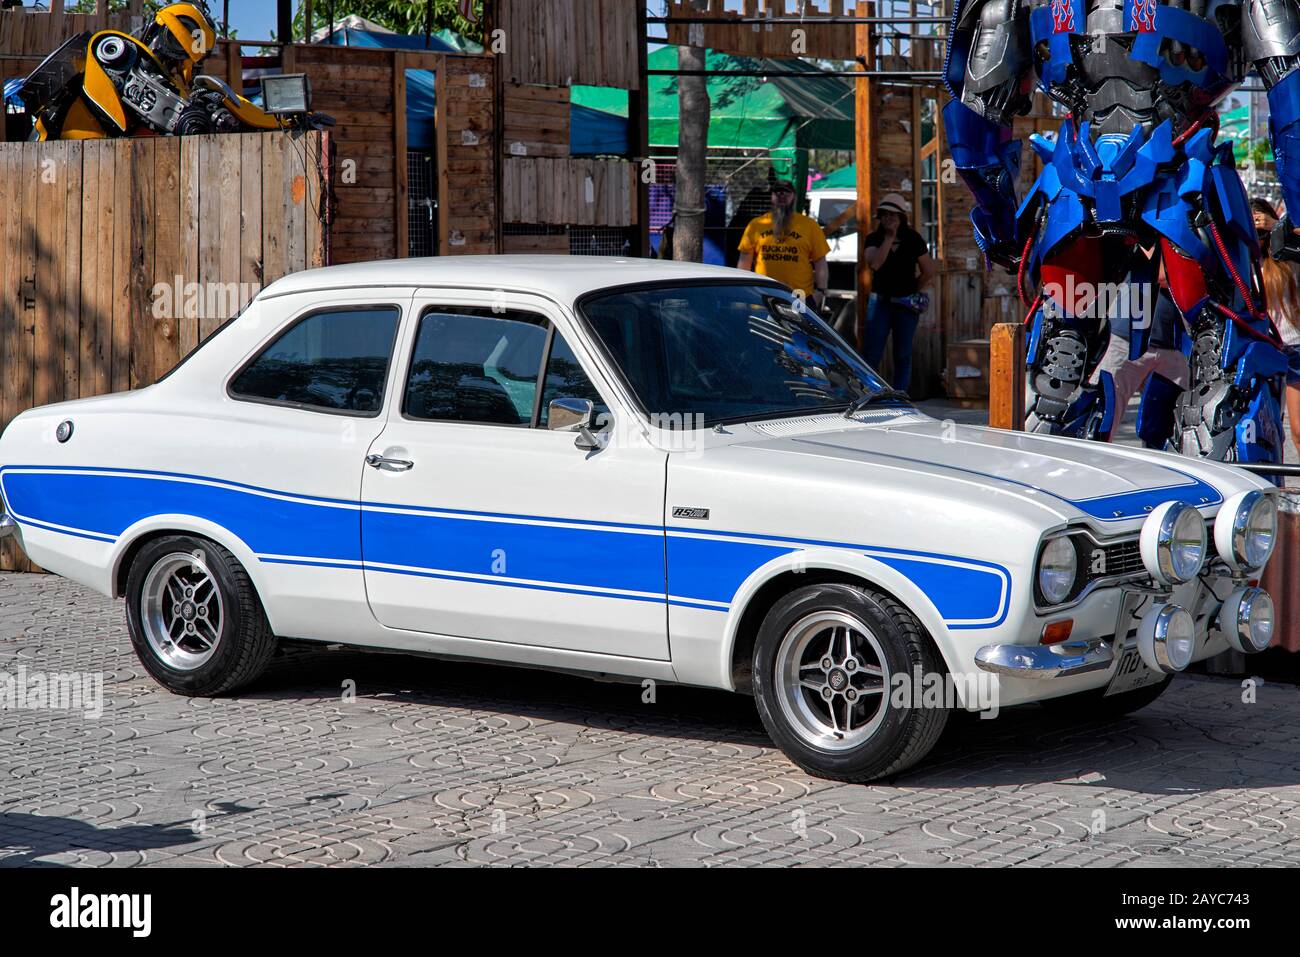 Ford Escort Rs 2000